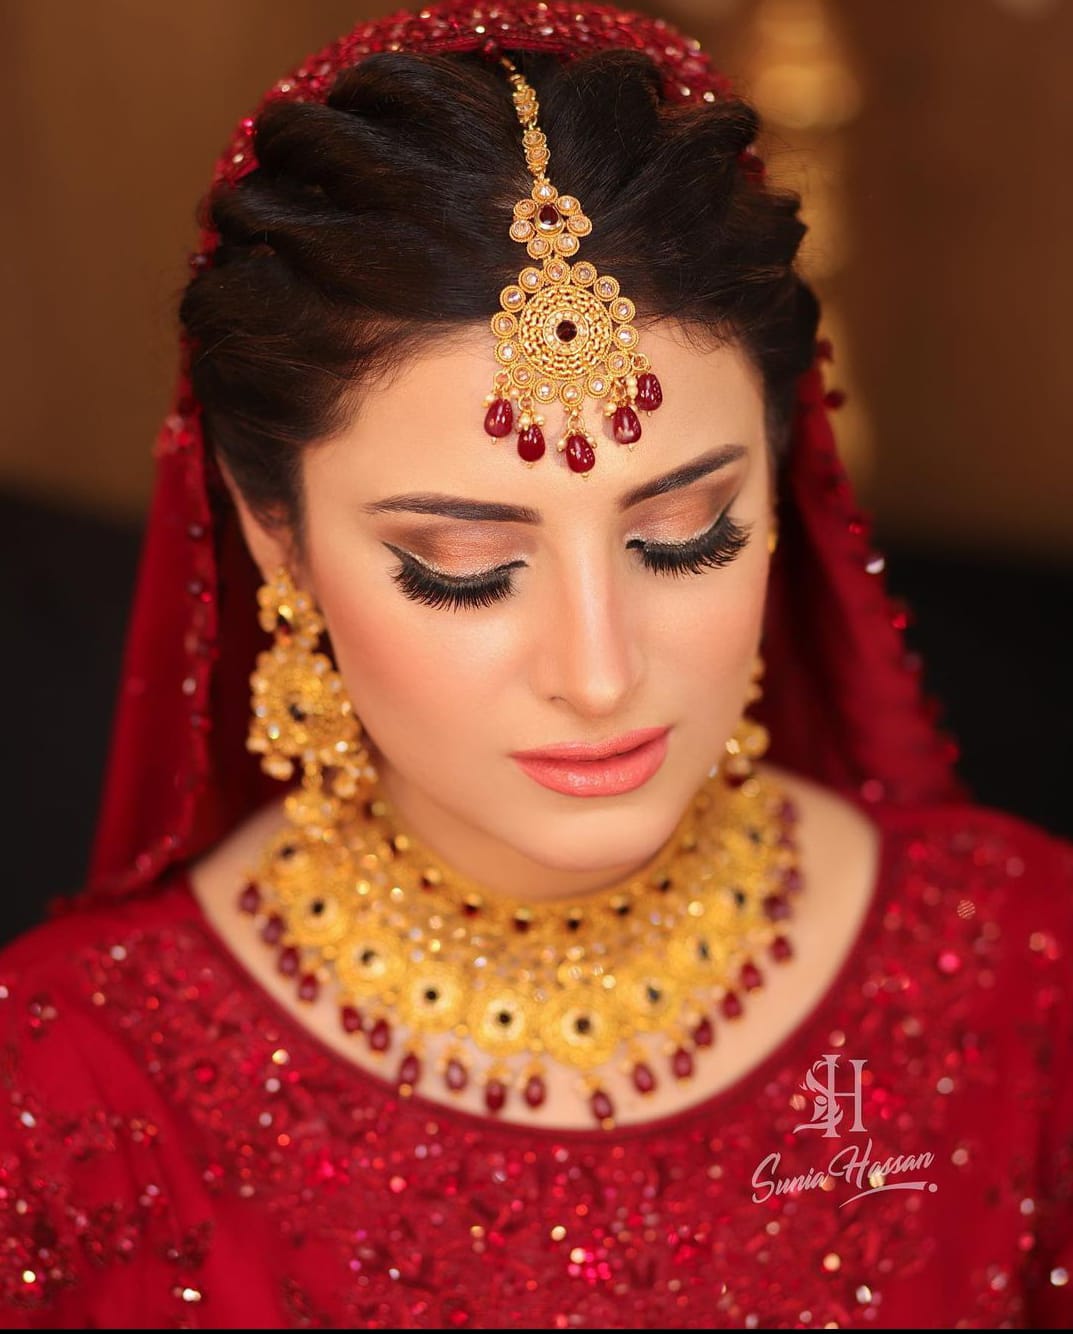 Get The Perfect Wedding Makeup Looks idea For Your Big Day - SetMyWed